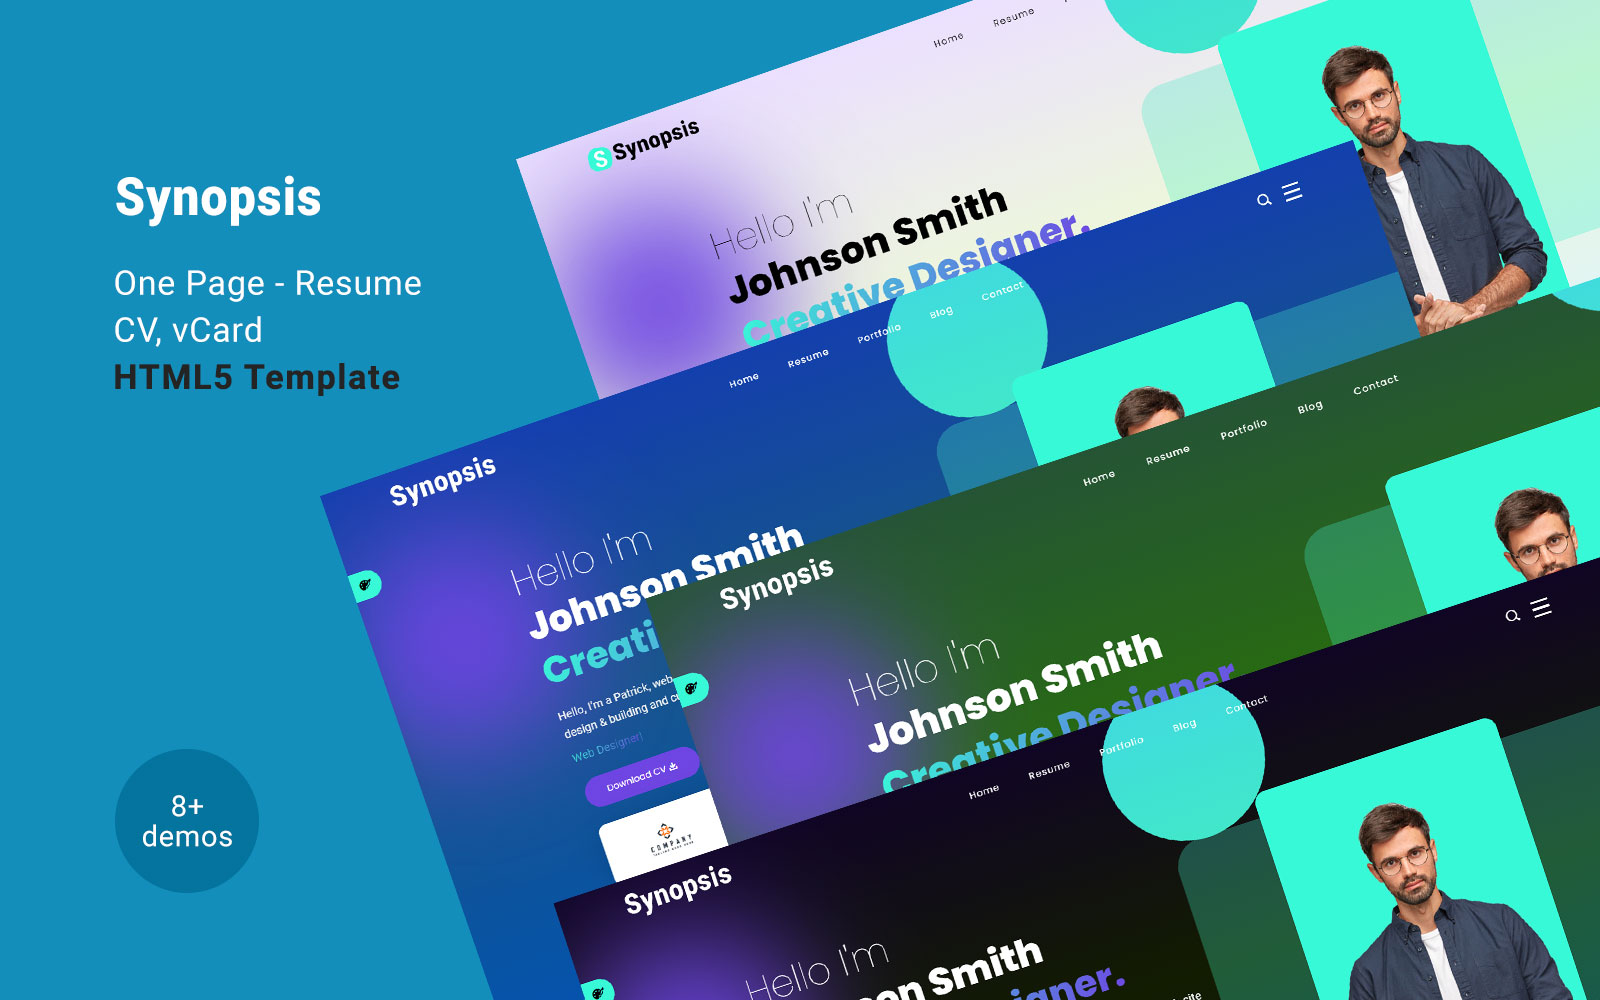 Synopsis - One Page Resume / CV / vCard HTML5 Template